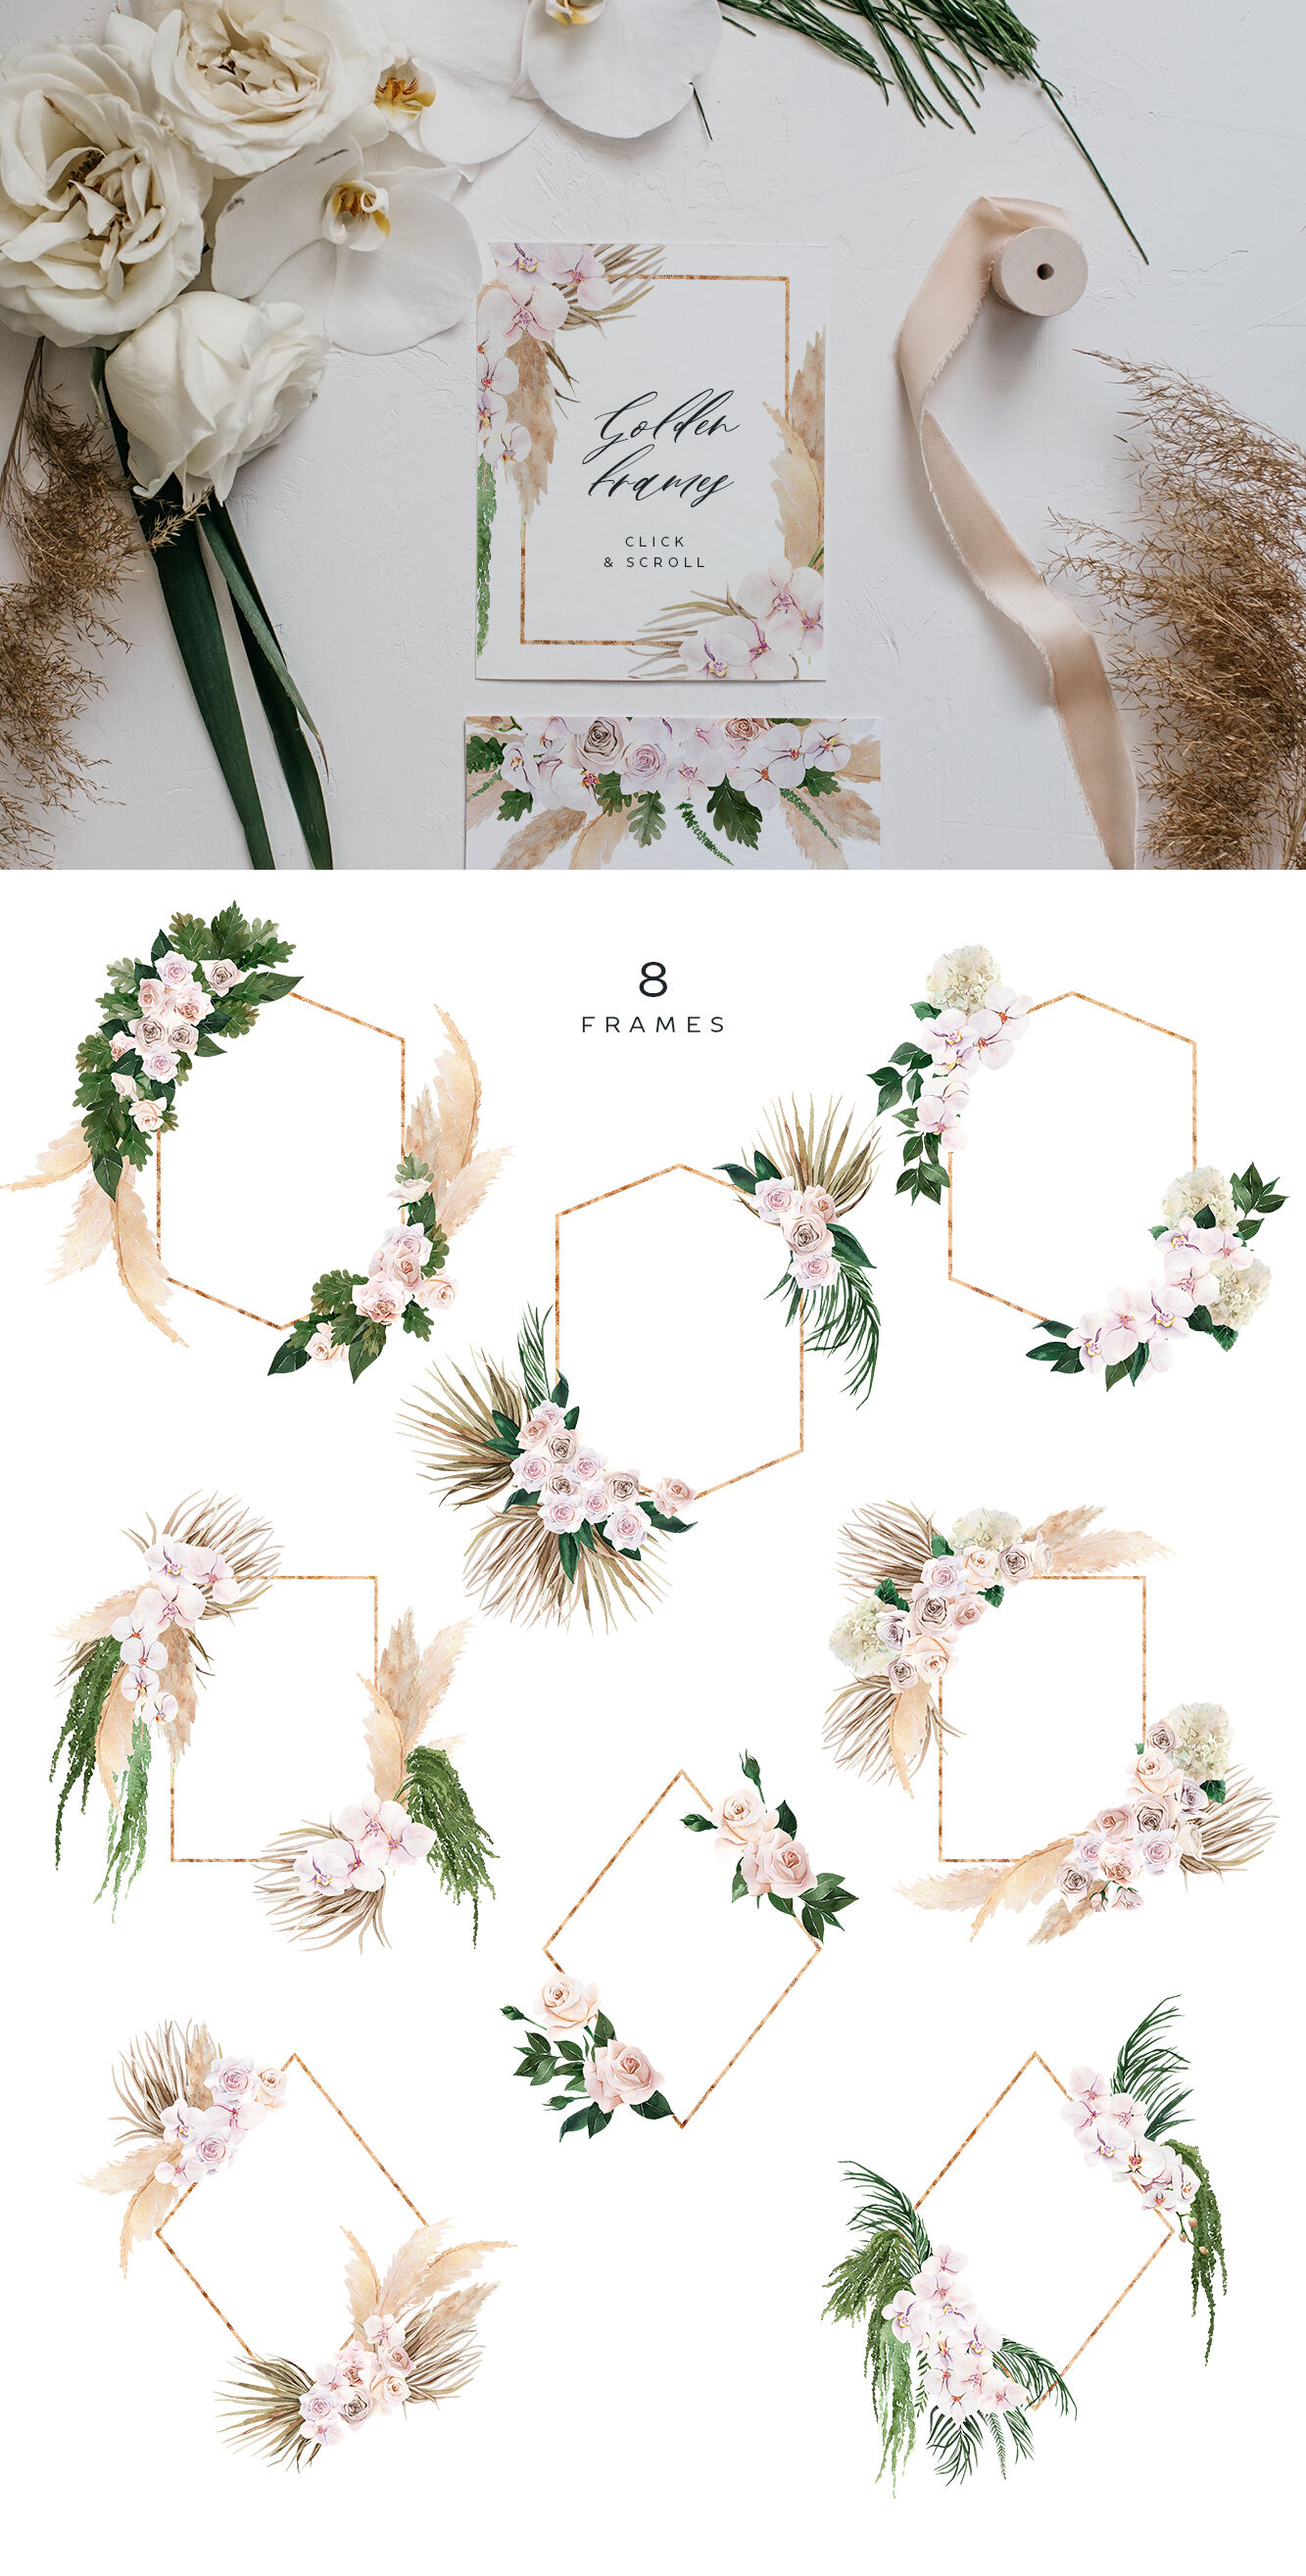 Lush Nude Floral Collection By Little Magic Box Thehungryjpeg Com